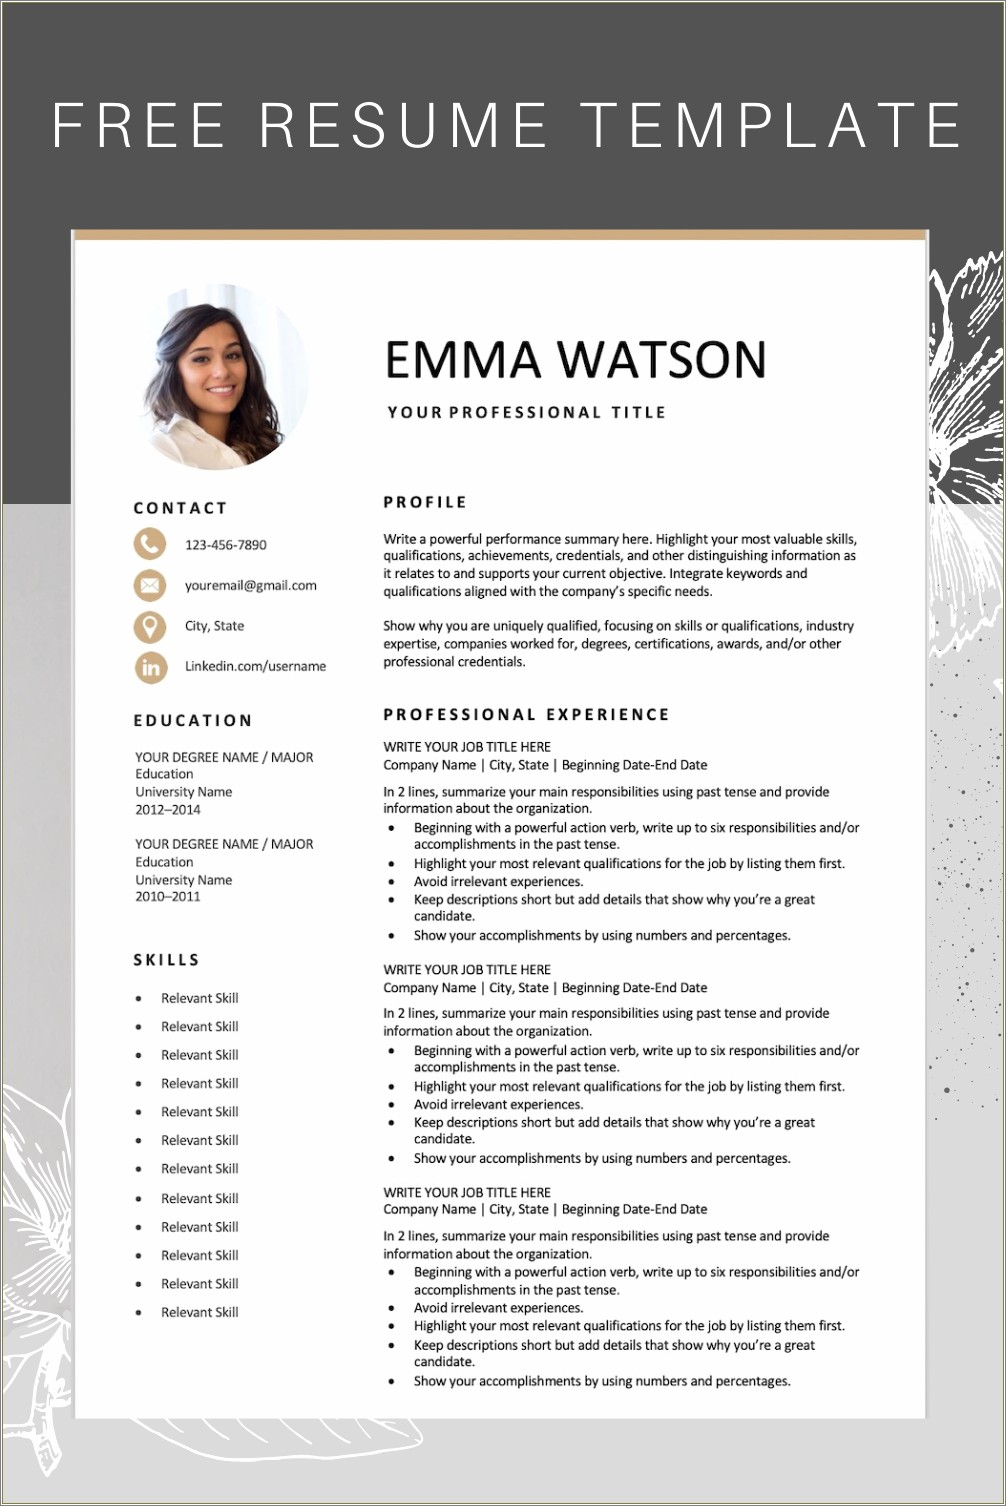 Download Latest Resume Template For Free